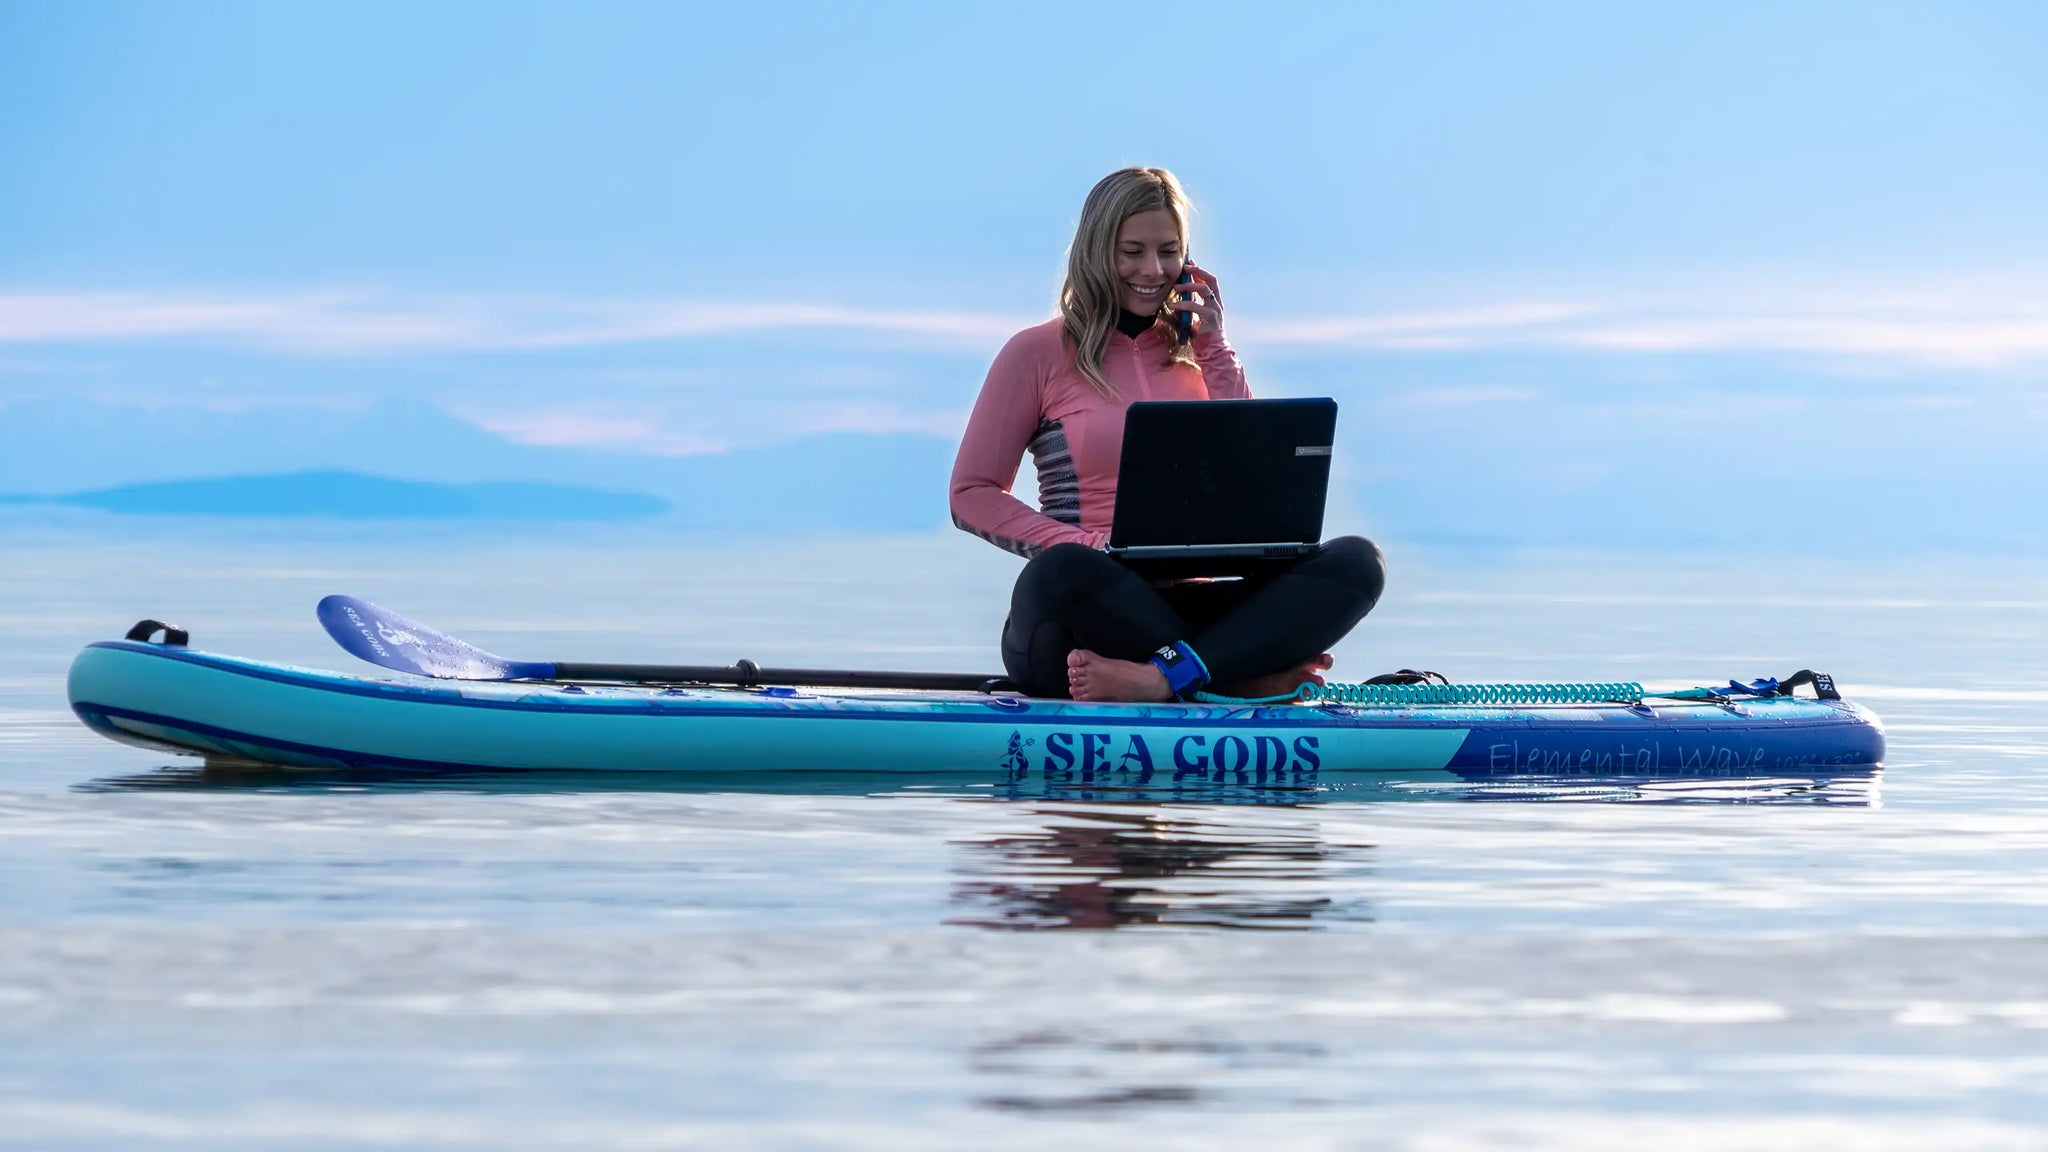 Canadian_customer_service_sea_gods_isups_about_sea_gods_stand_up_paddleboards